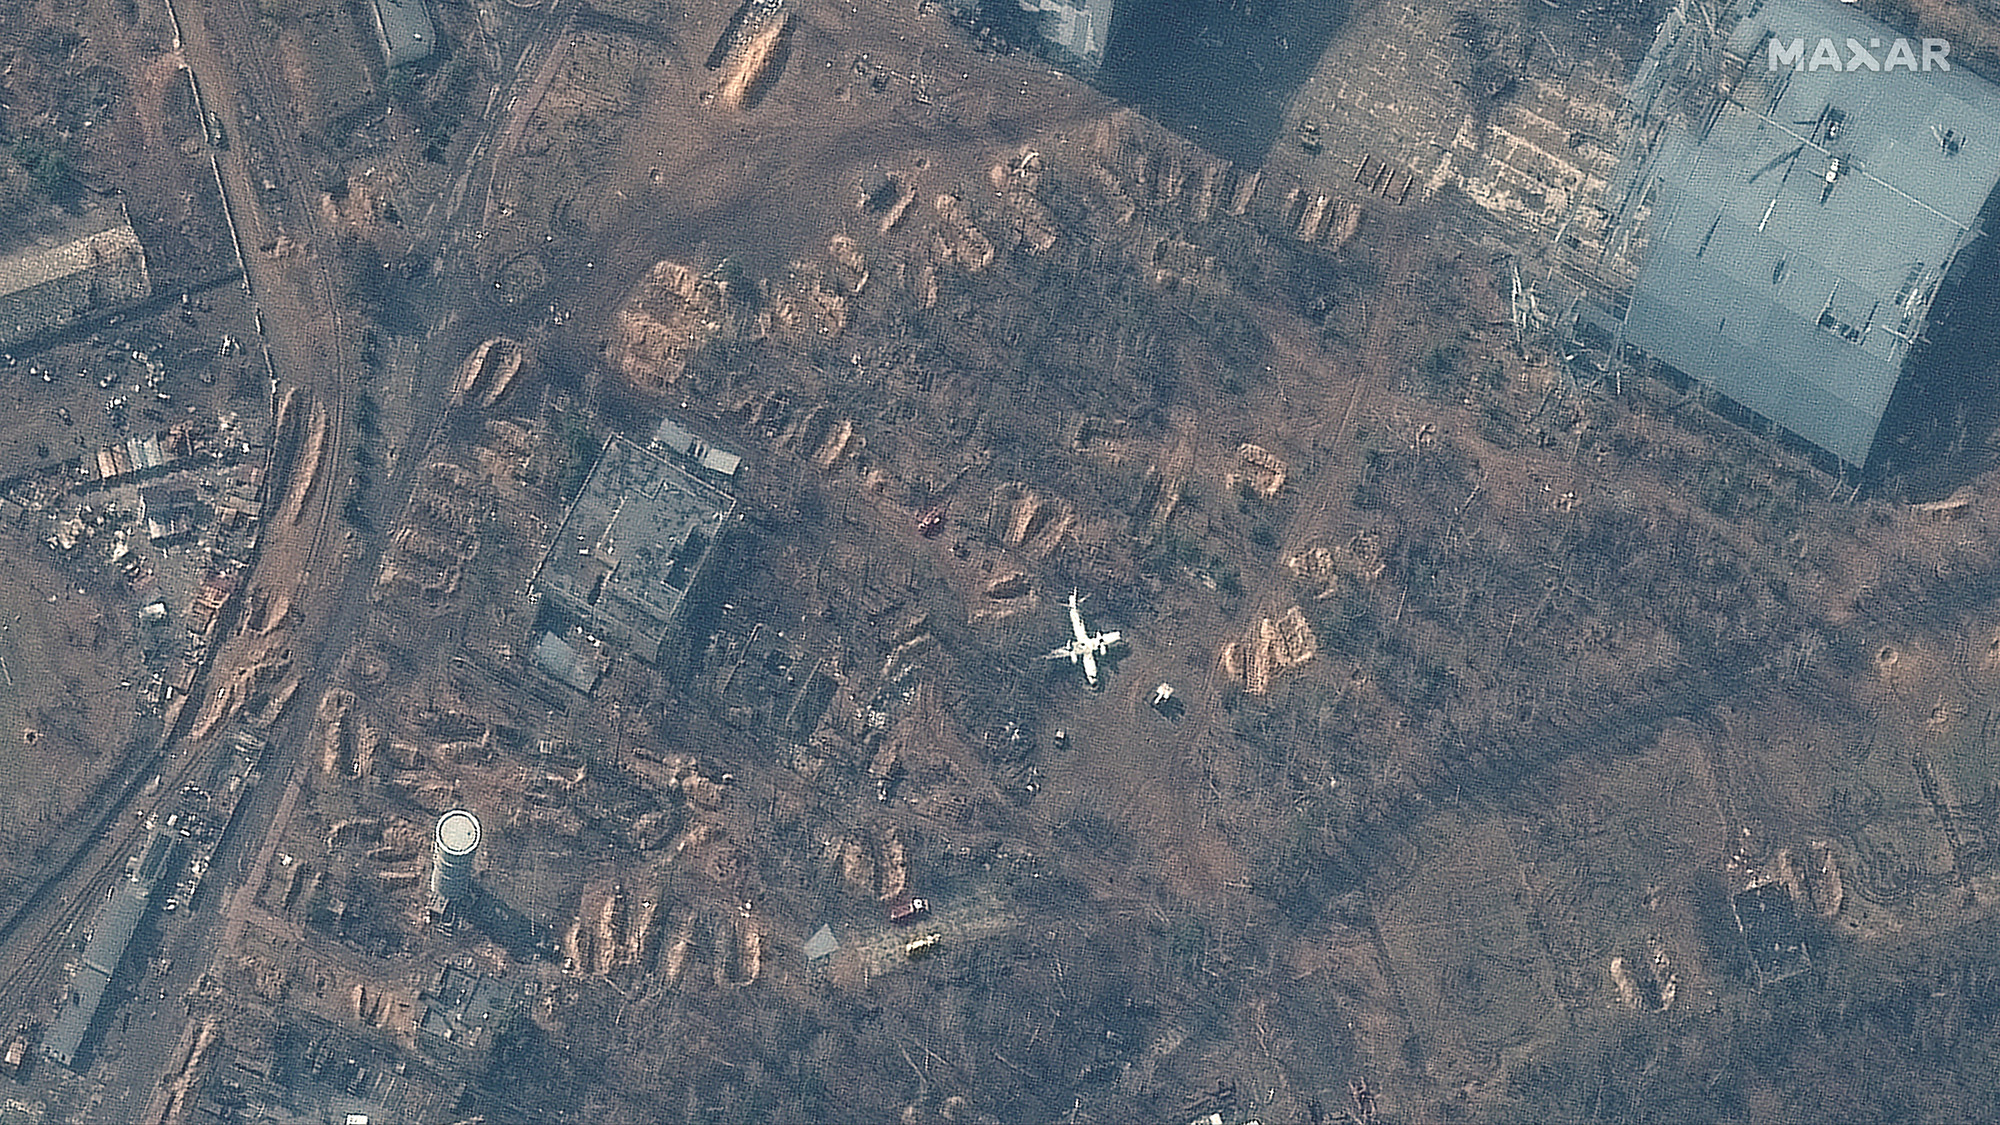 Russian forces withdraw from Antonov Airport, outside of Kyiv, satellite images confirm